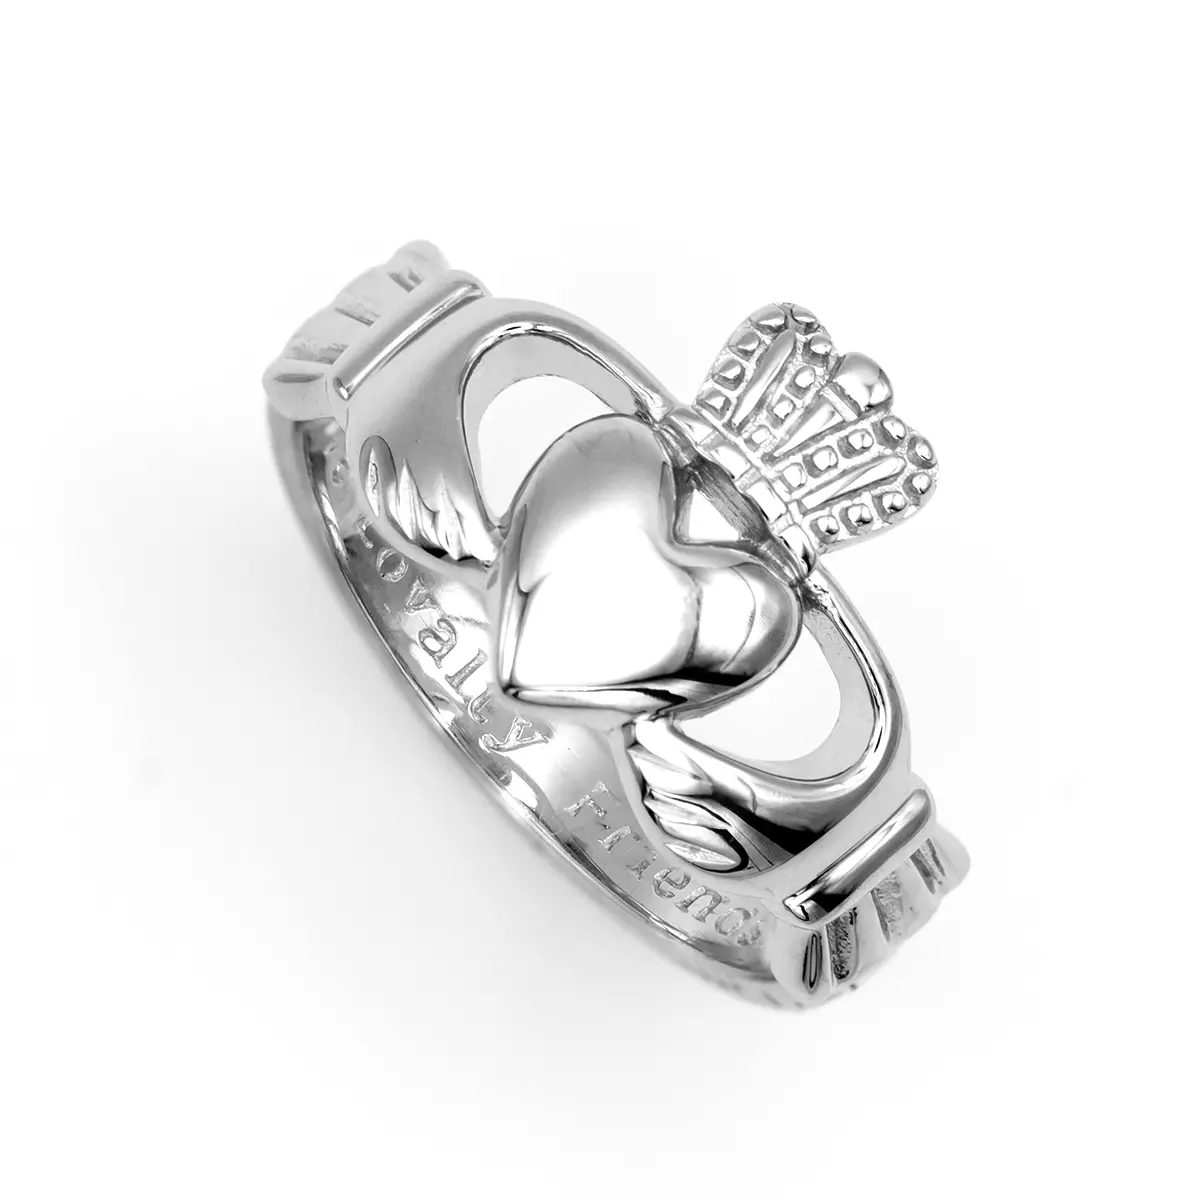 Product Review Gents Irish Claddagh Ring in Sterling Silver